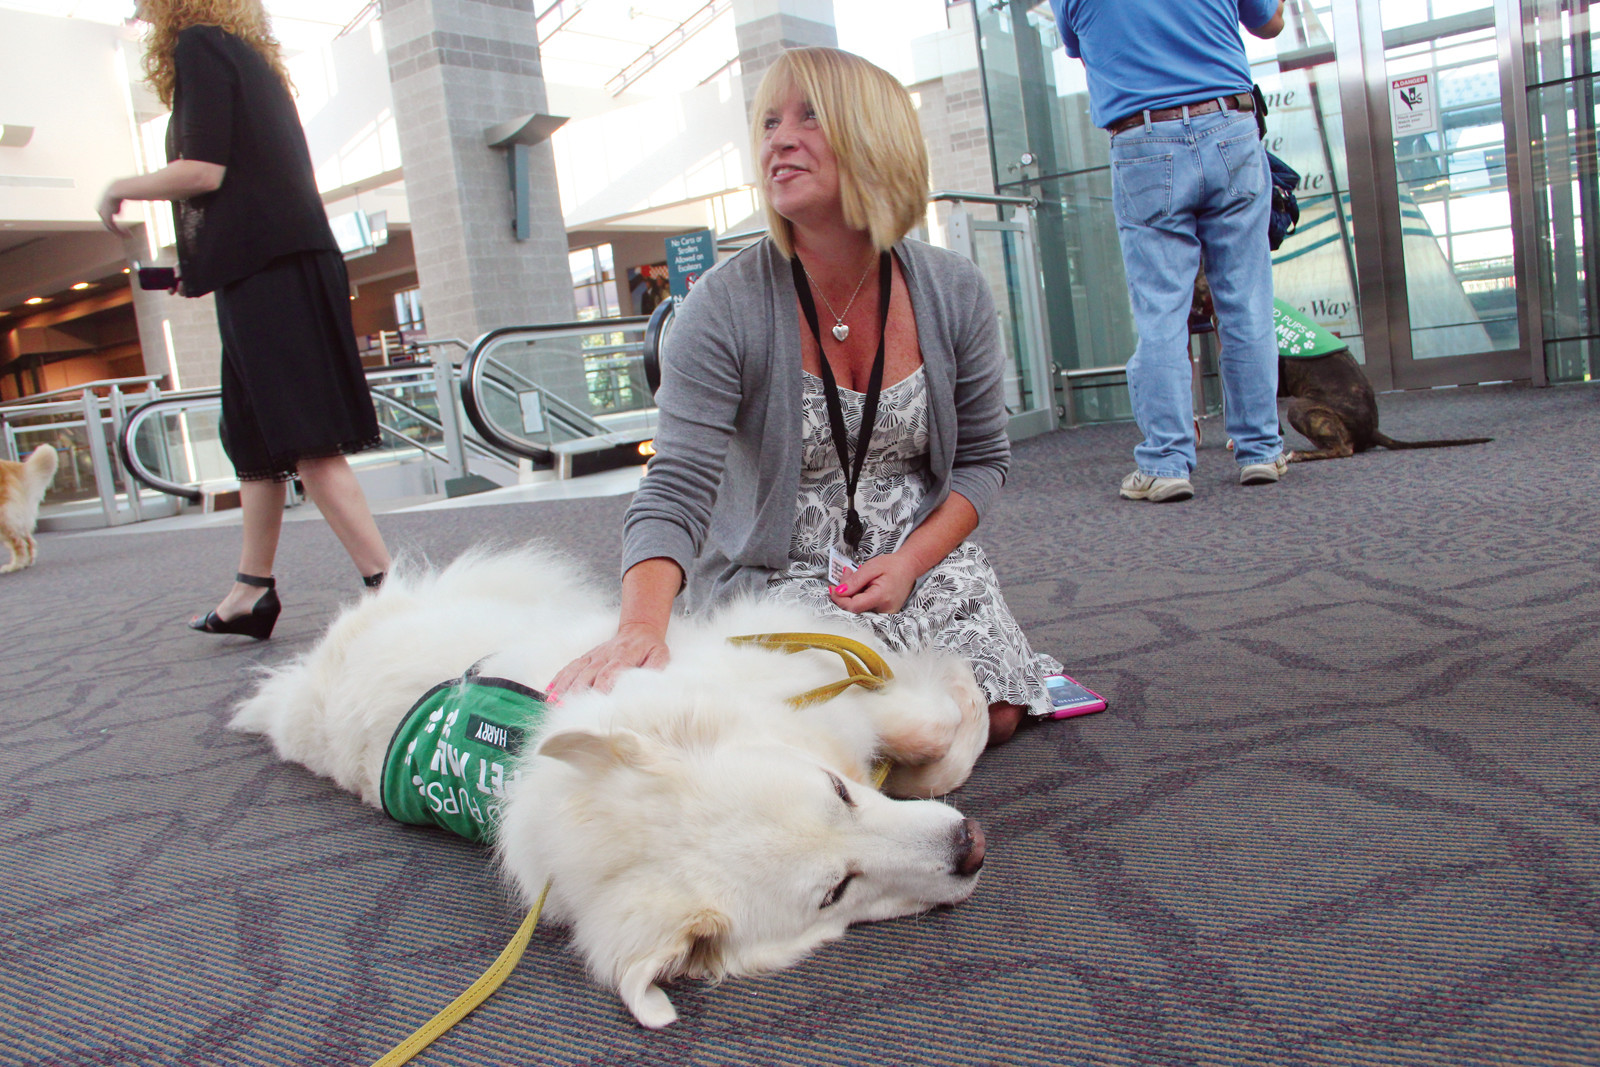 LOVING IT: Harry the Great Pyrenees enjoys a pet from PVD Pups co-founder Liberty Luciano.